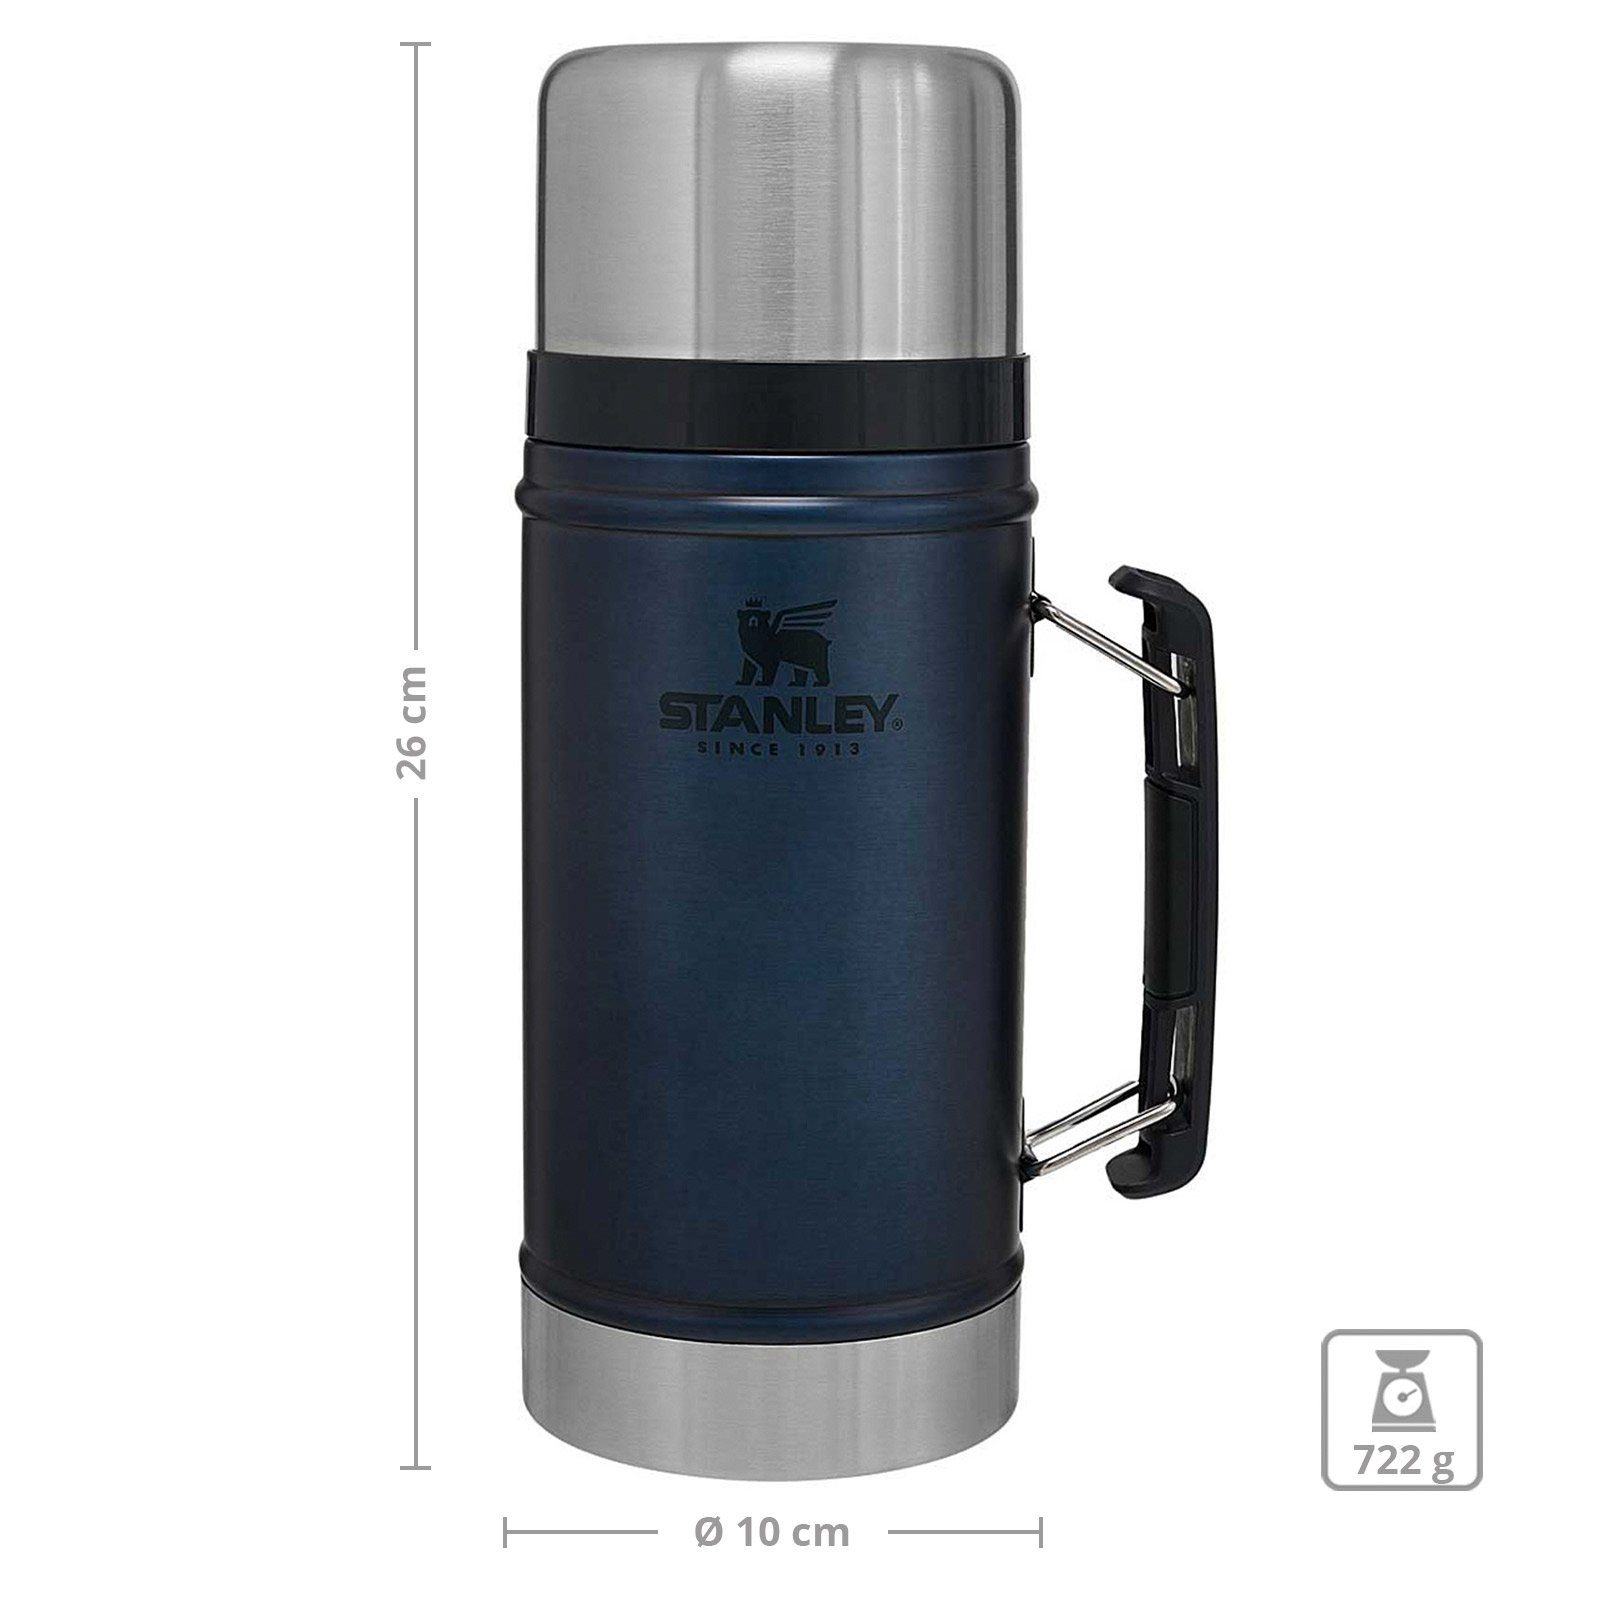 Edelstahl STANLEY Behälter Isolierbehälter Food 18/8, Thermo, Thermobehälter Classic Blau Essen 0,94L Griff Container